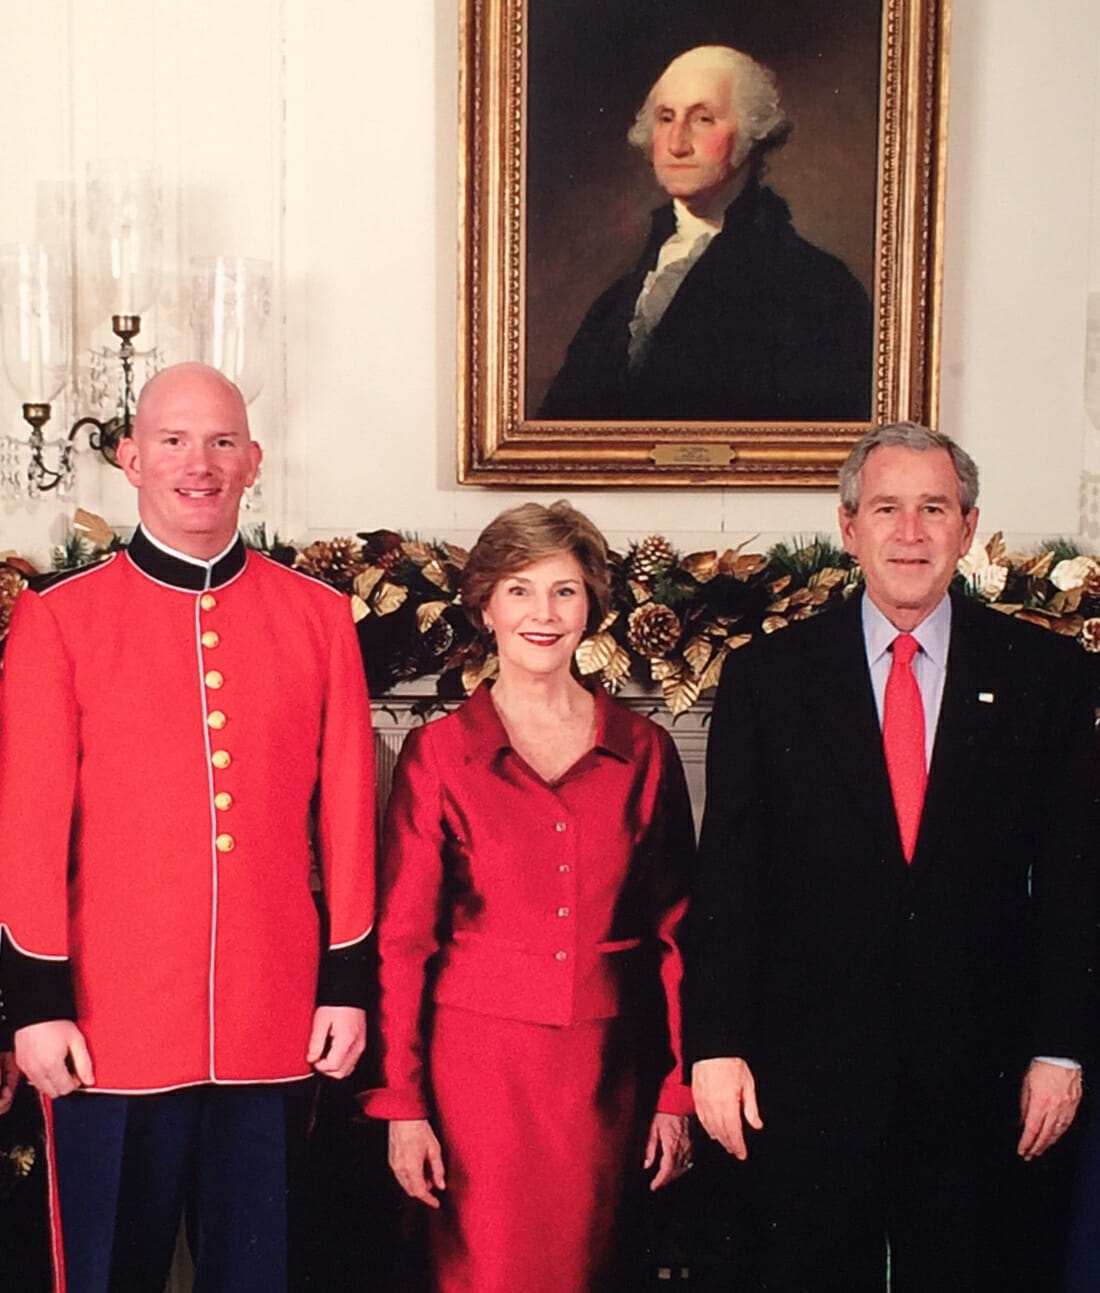 Peter Wilson with President George W. Bush and Mrs. George W. Bush